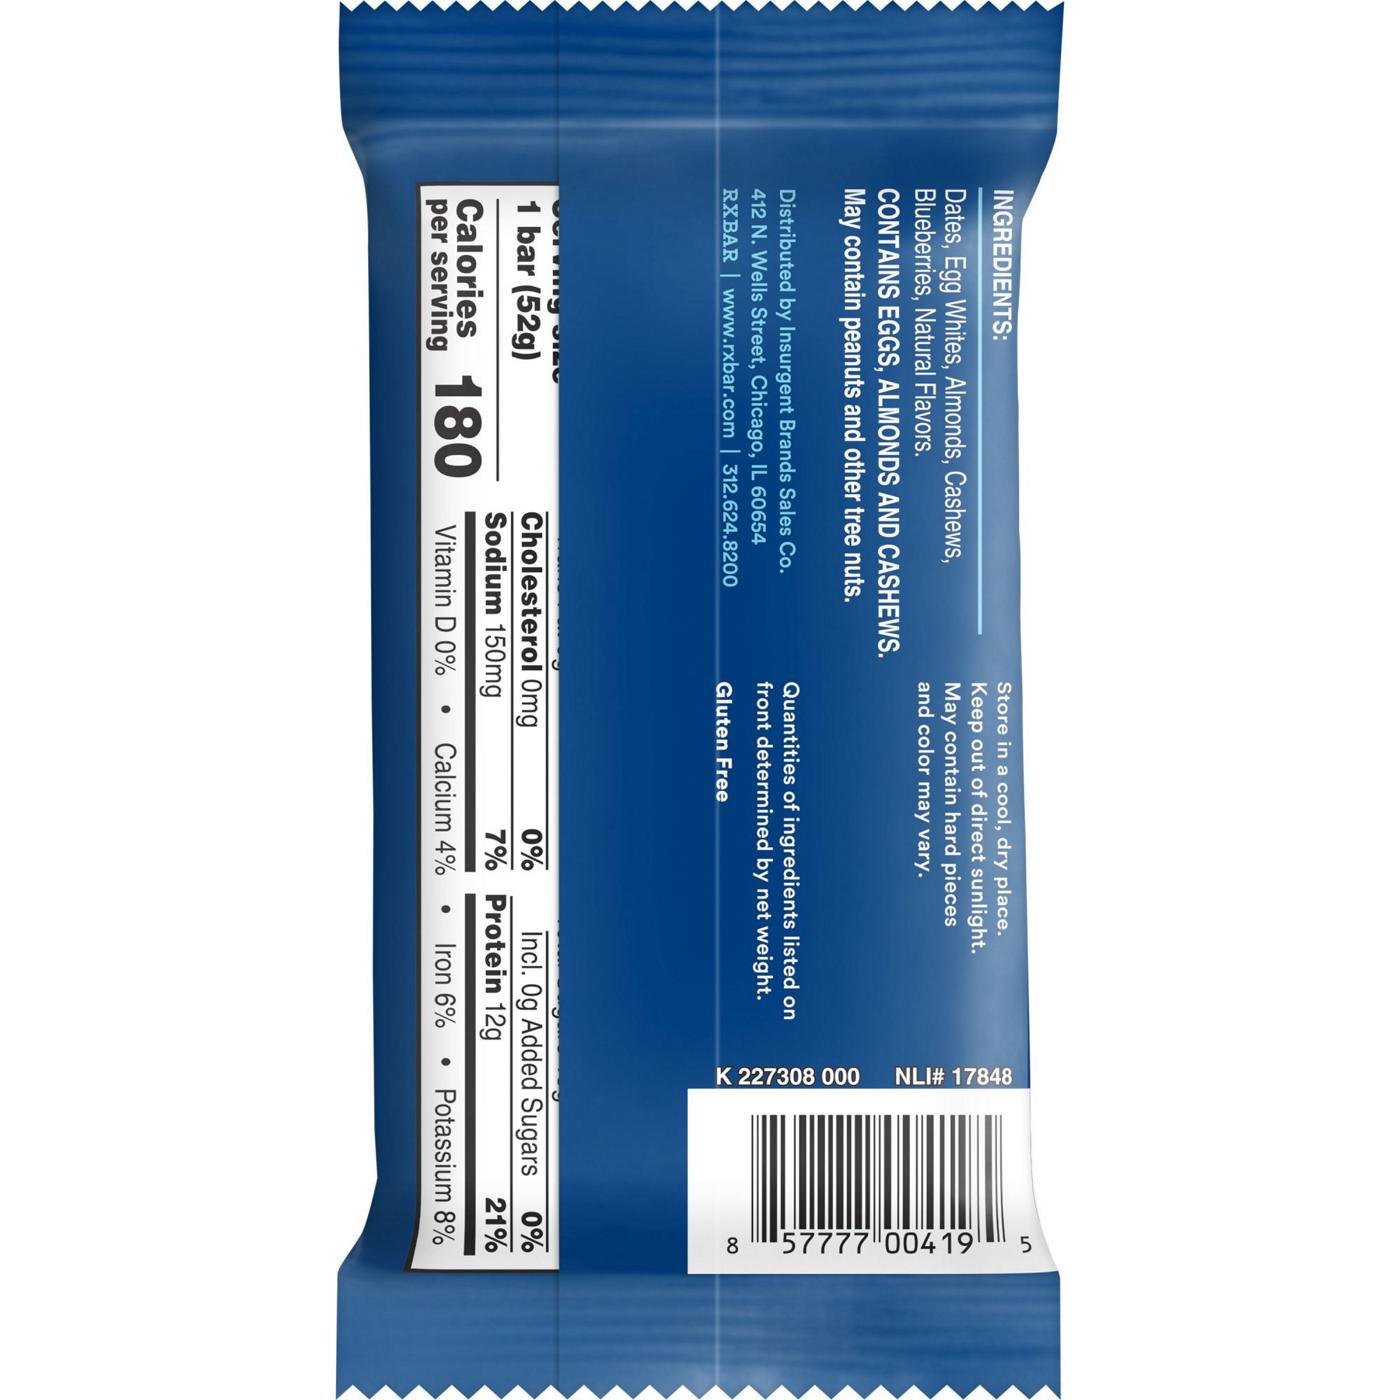 RXBAR Blueberry Protein Bars; image 3 of 3